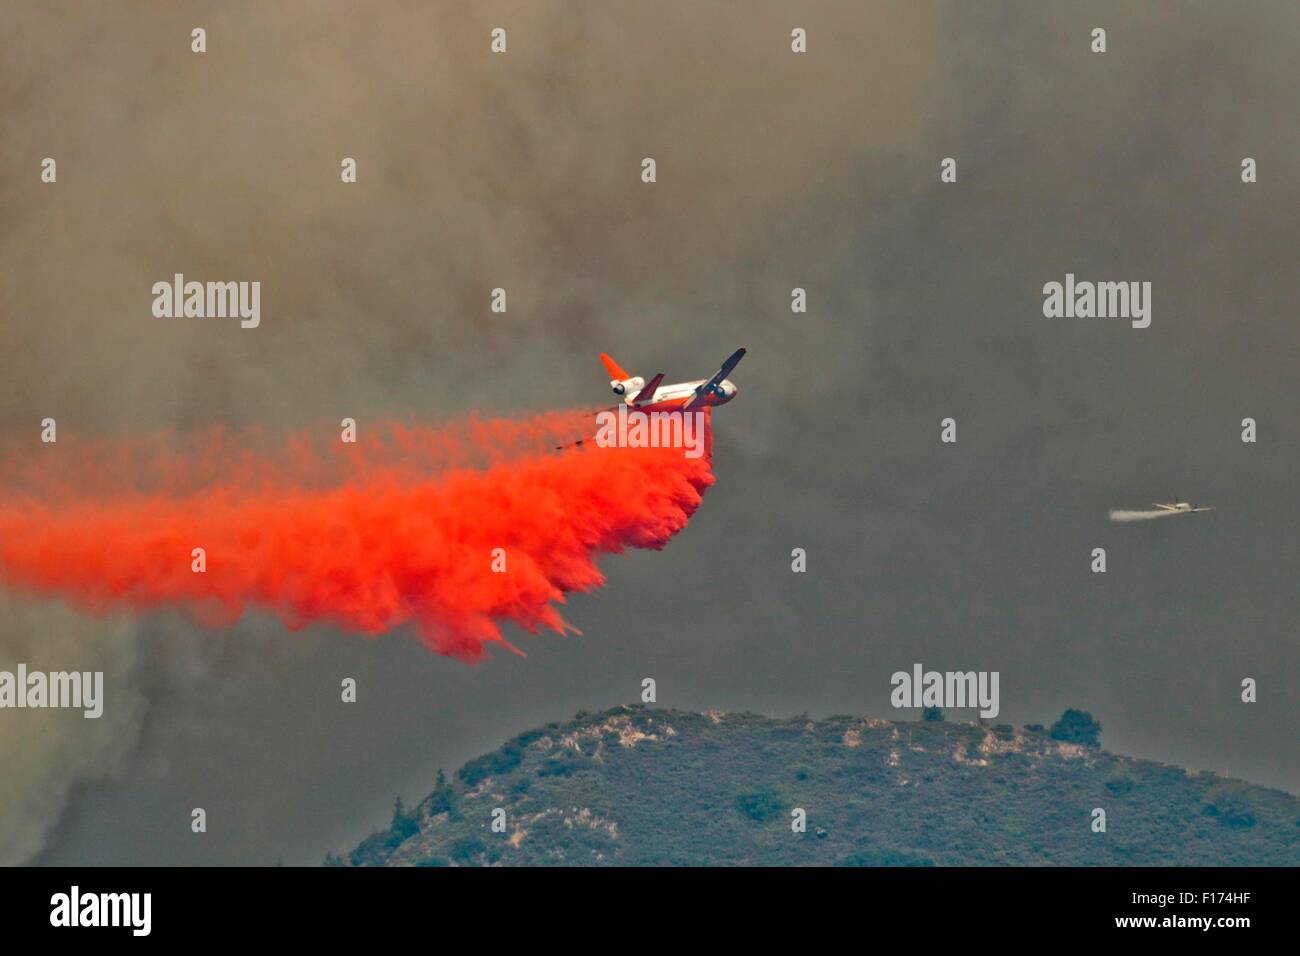 An super DC-10 air tanker drops fire retardant on the Rough Fire burning in the Sierra National Forest August 26, 2015 near Hume Lake, California. The fire caused by lightning has consumed an estimated 55,959 acres. Stock Photo